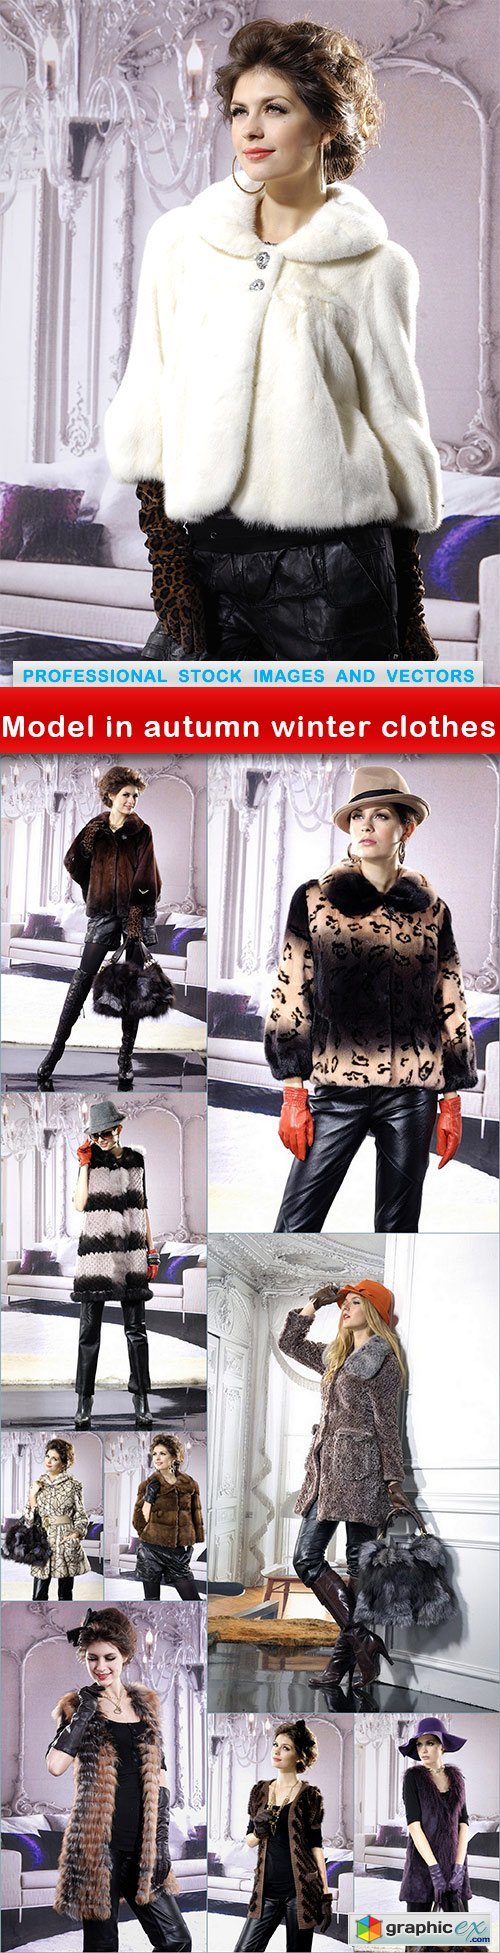 Model in autumn winter clothes - 10 UHQ JPEG